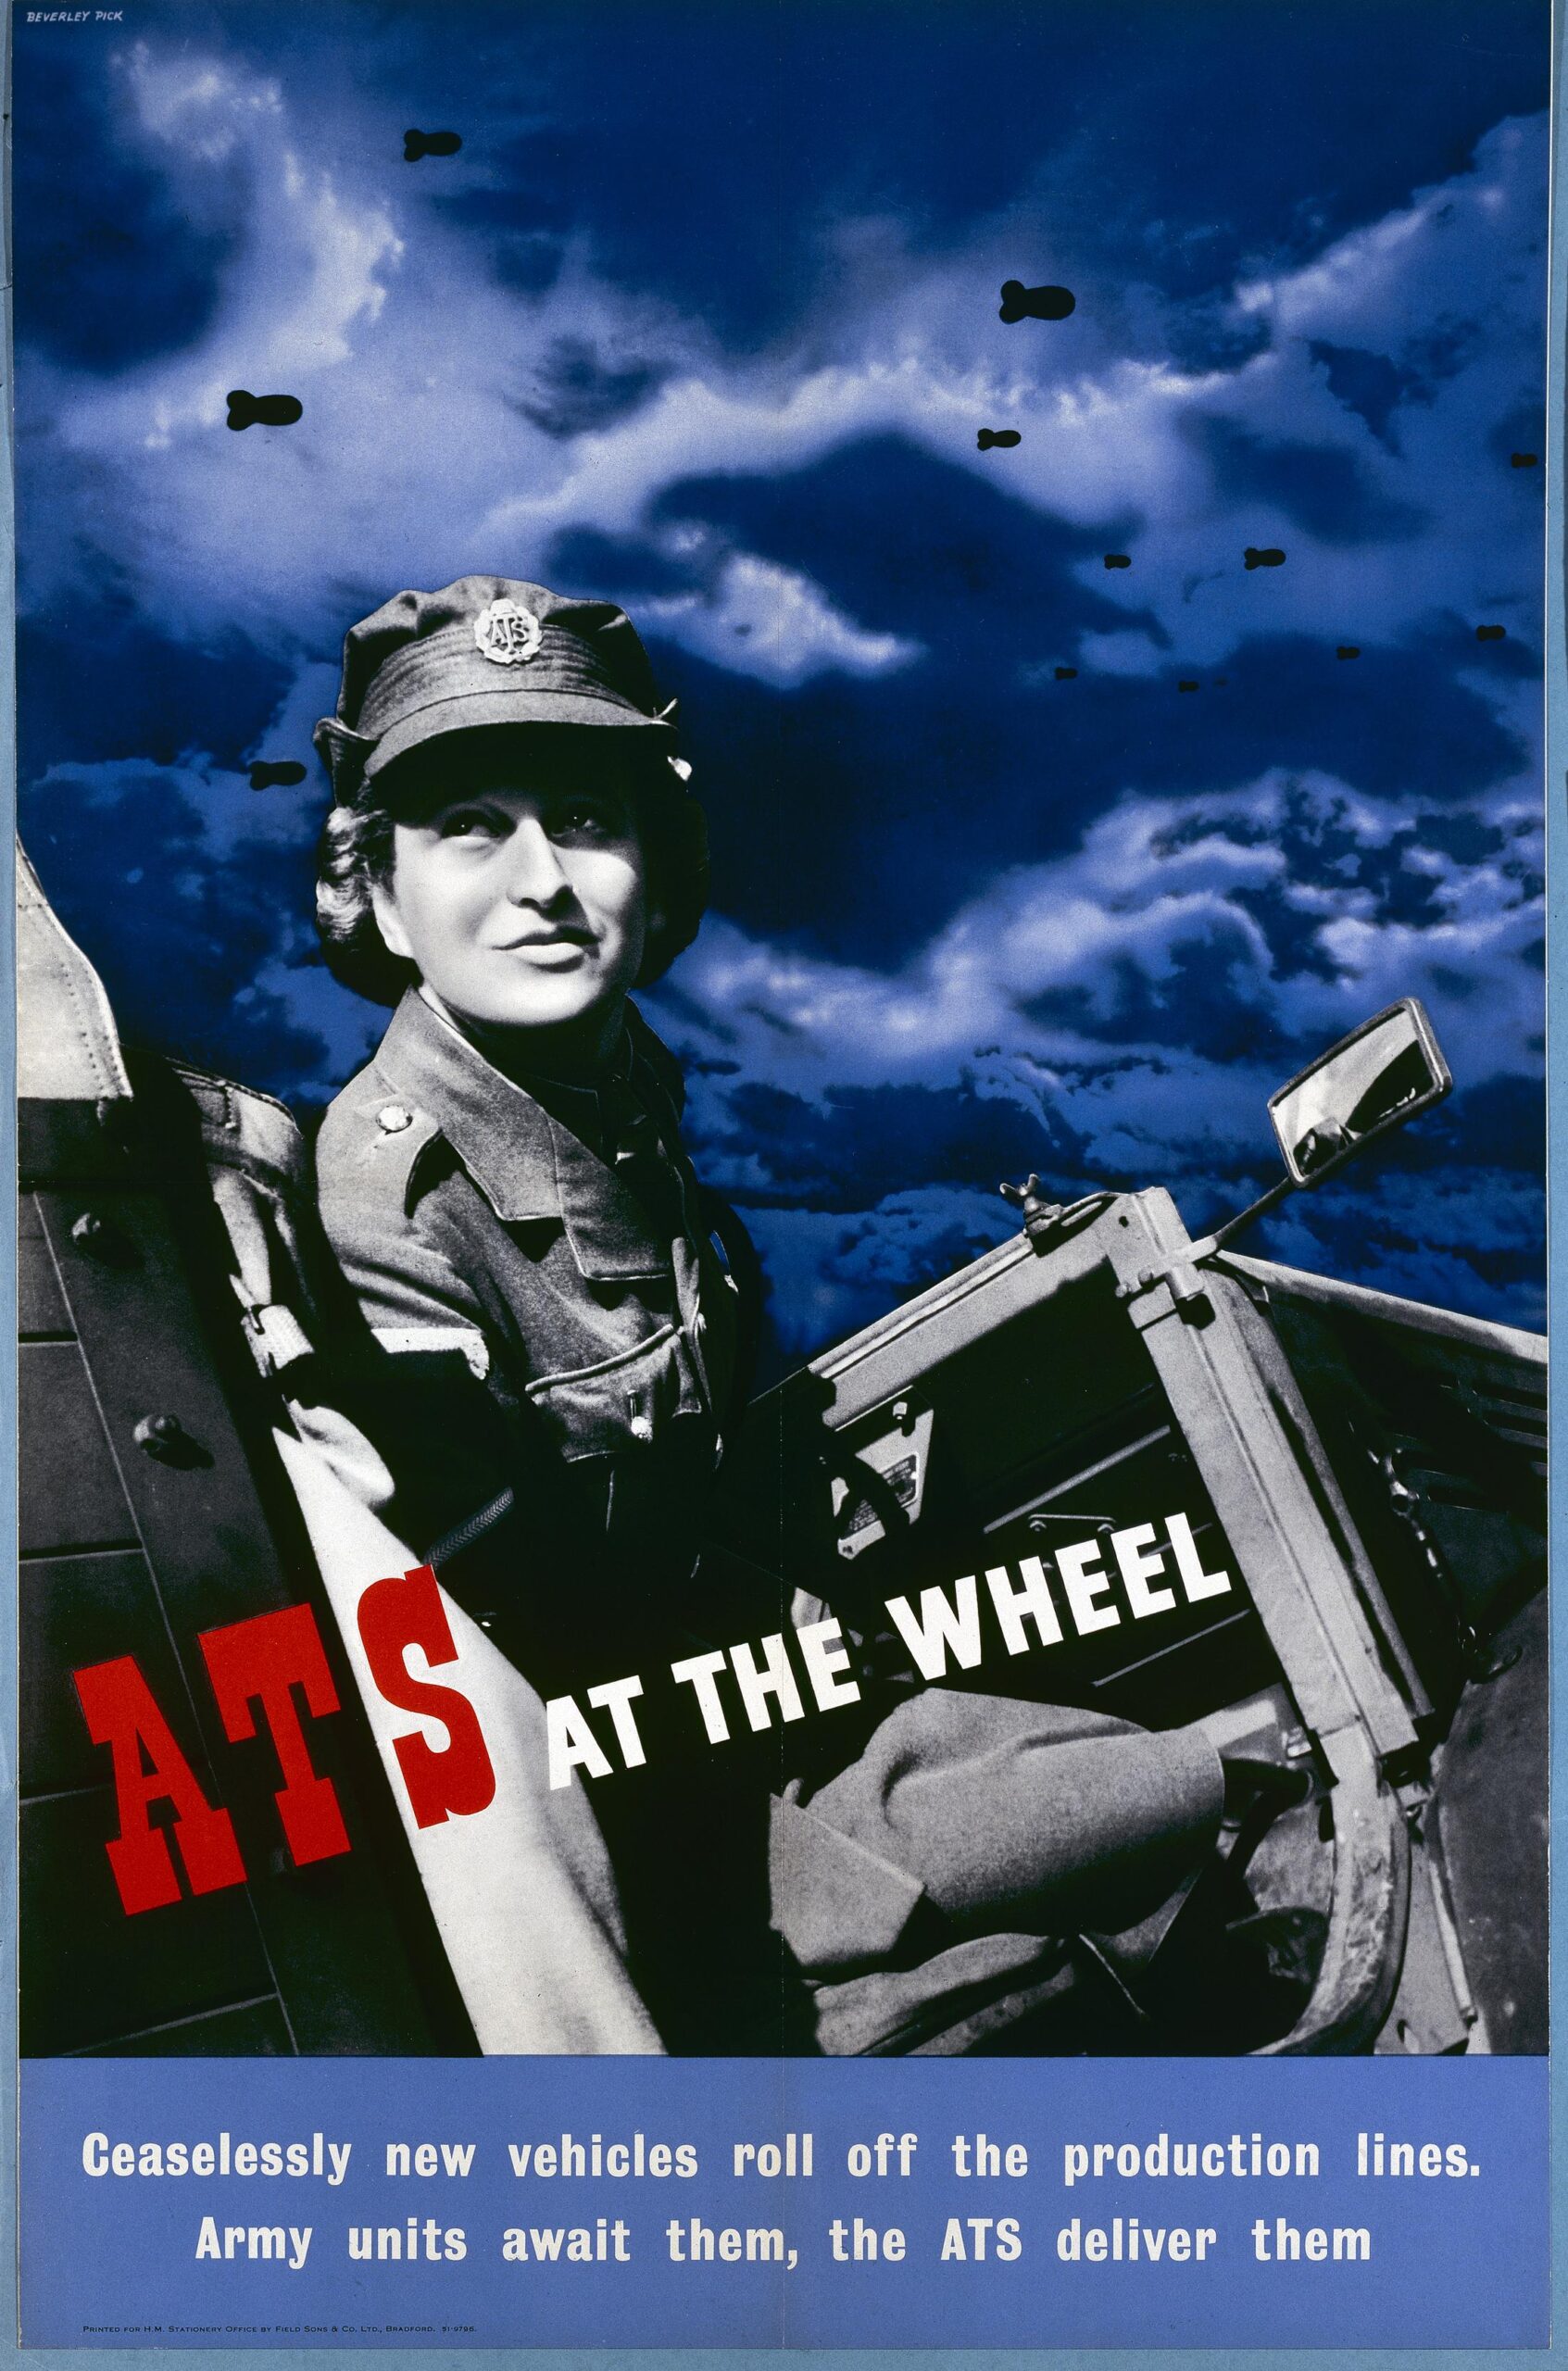 Poster featuring a photo of a woman at the wheel of a car looking behind her shoulder in front of a background of a cloudy sky with missiles.